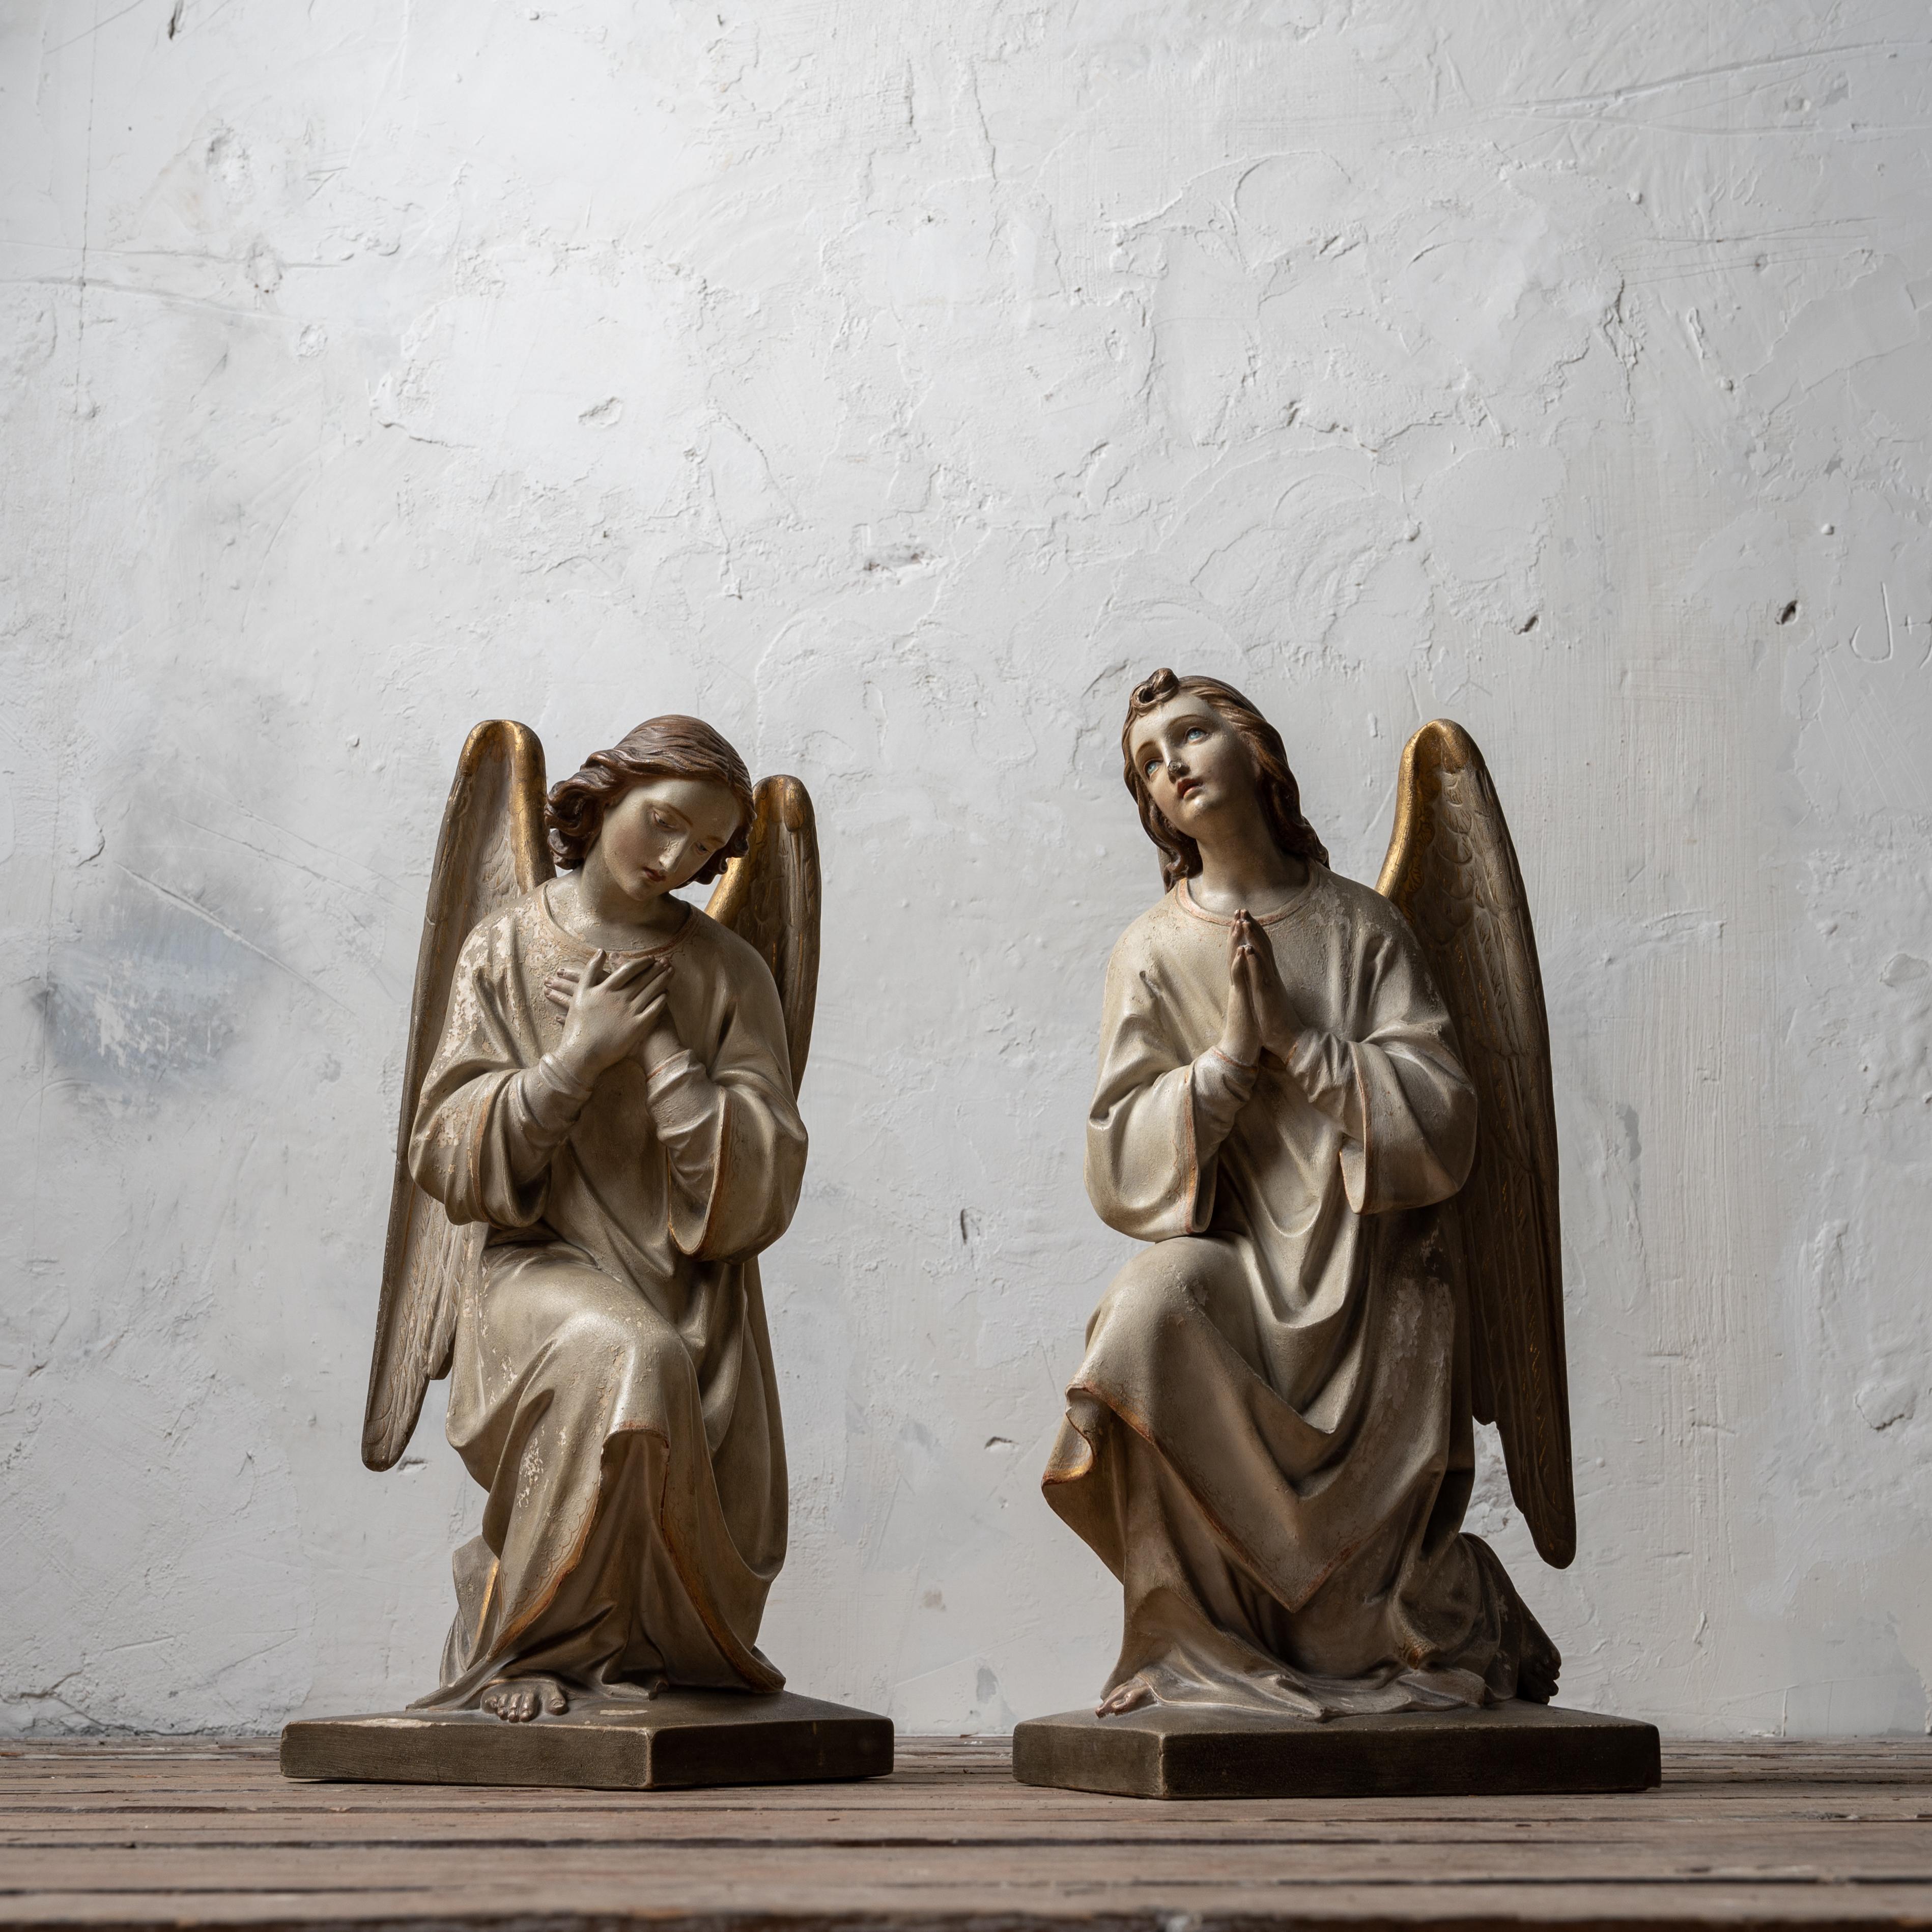 A pair of polychromed plaster altar angels, France or Belgium, late 19th century.

11 inches wide by 10 inches deep by 20 ¼ inches tall

